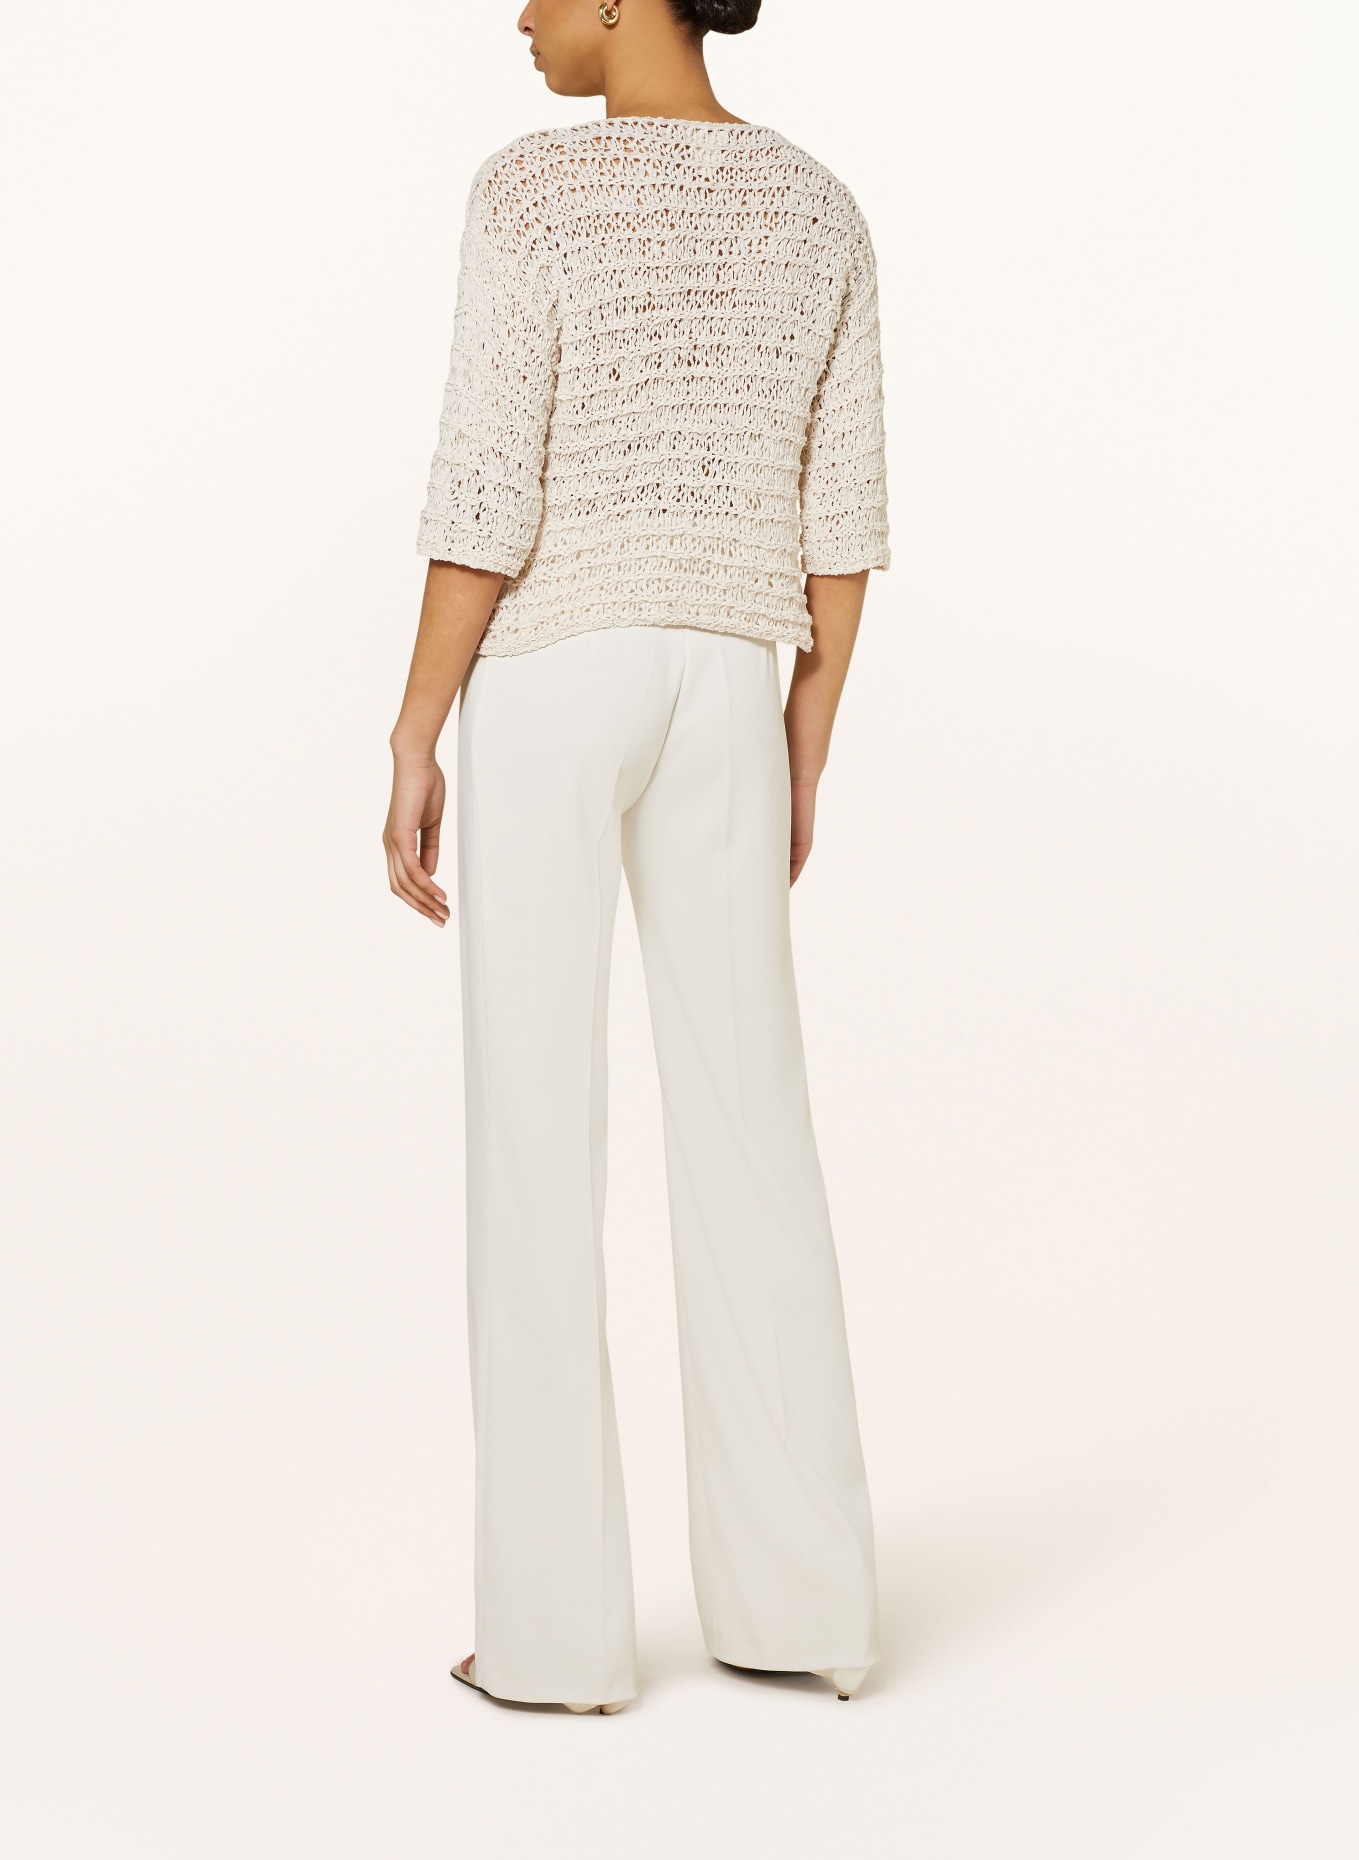 MARELLA Sweater CAFFE with 3/4 sleeves, Color: BEIGE (Image 3)